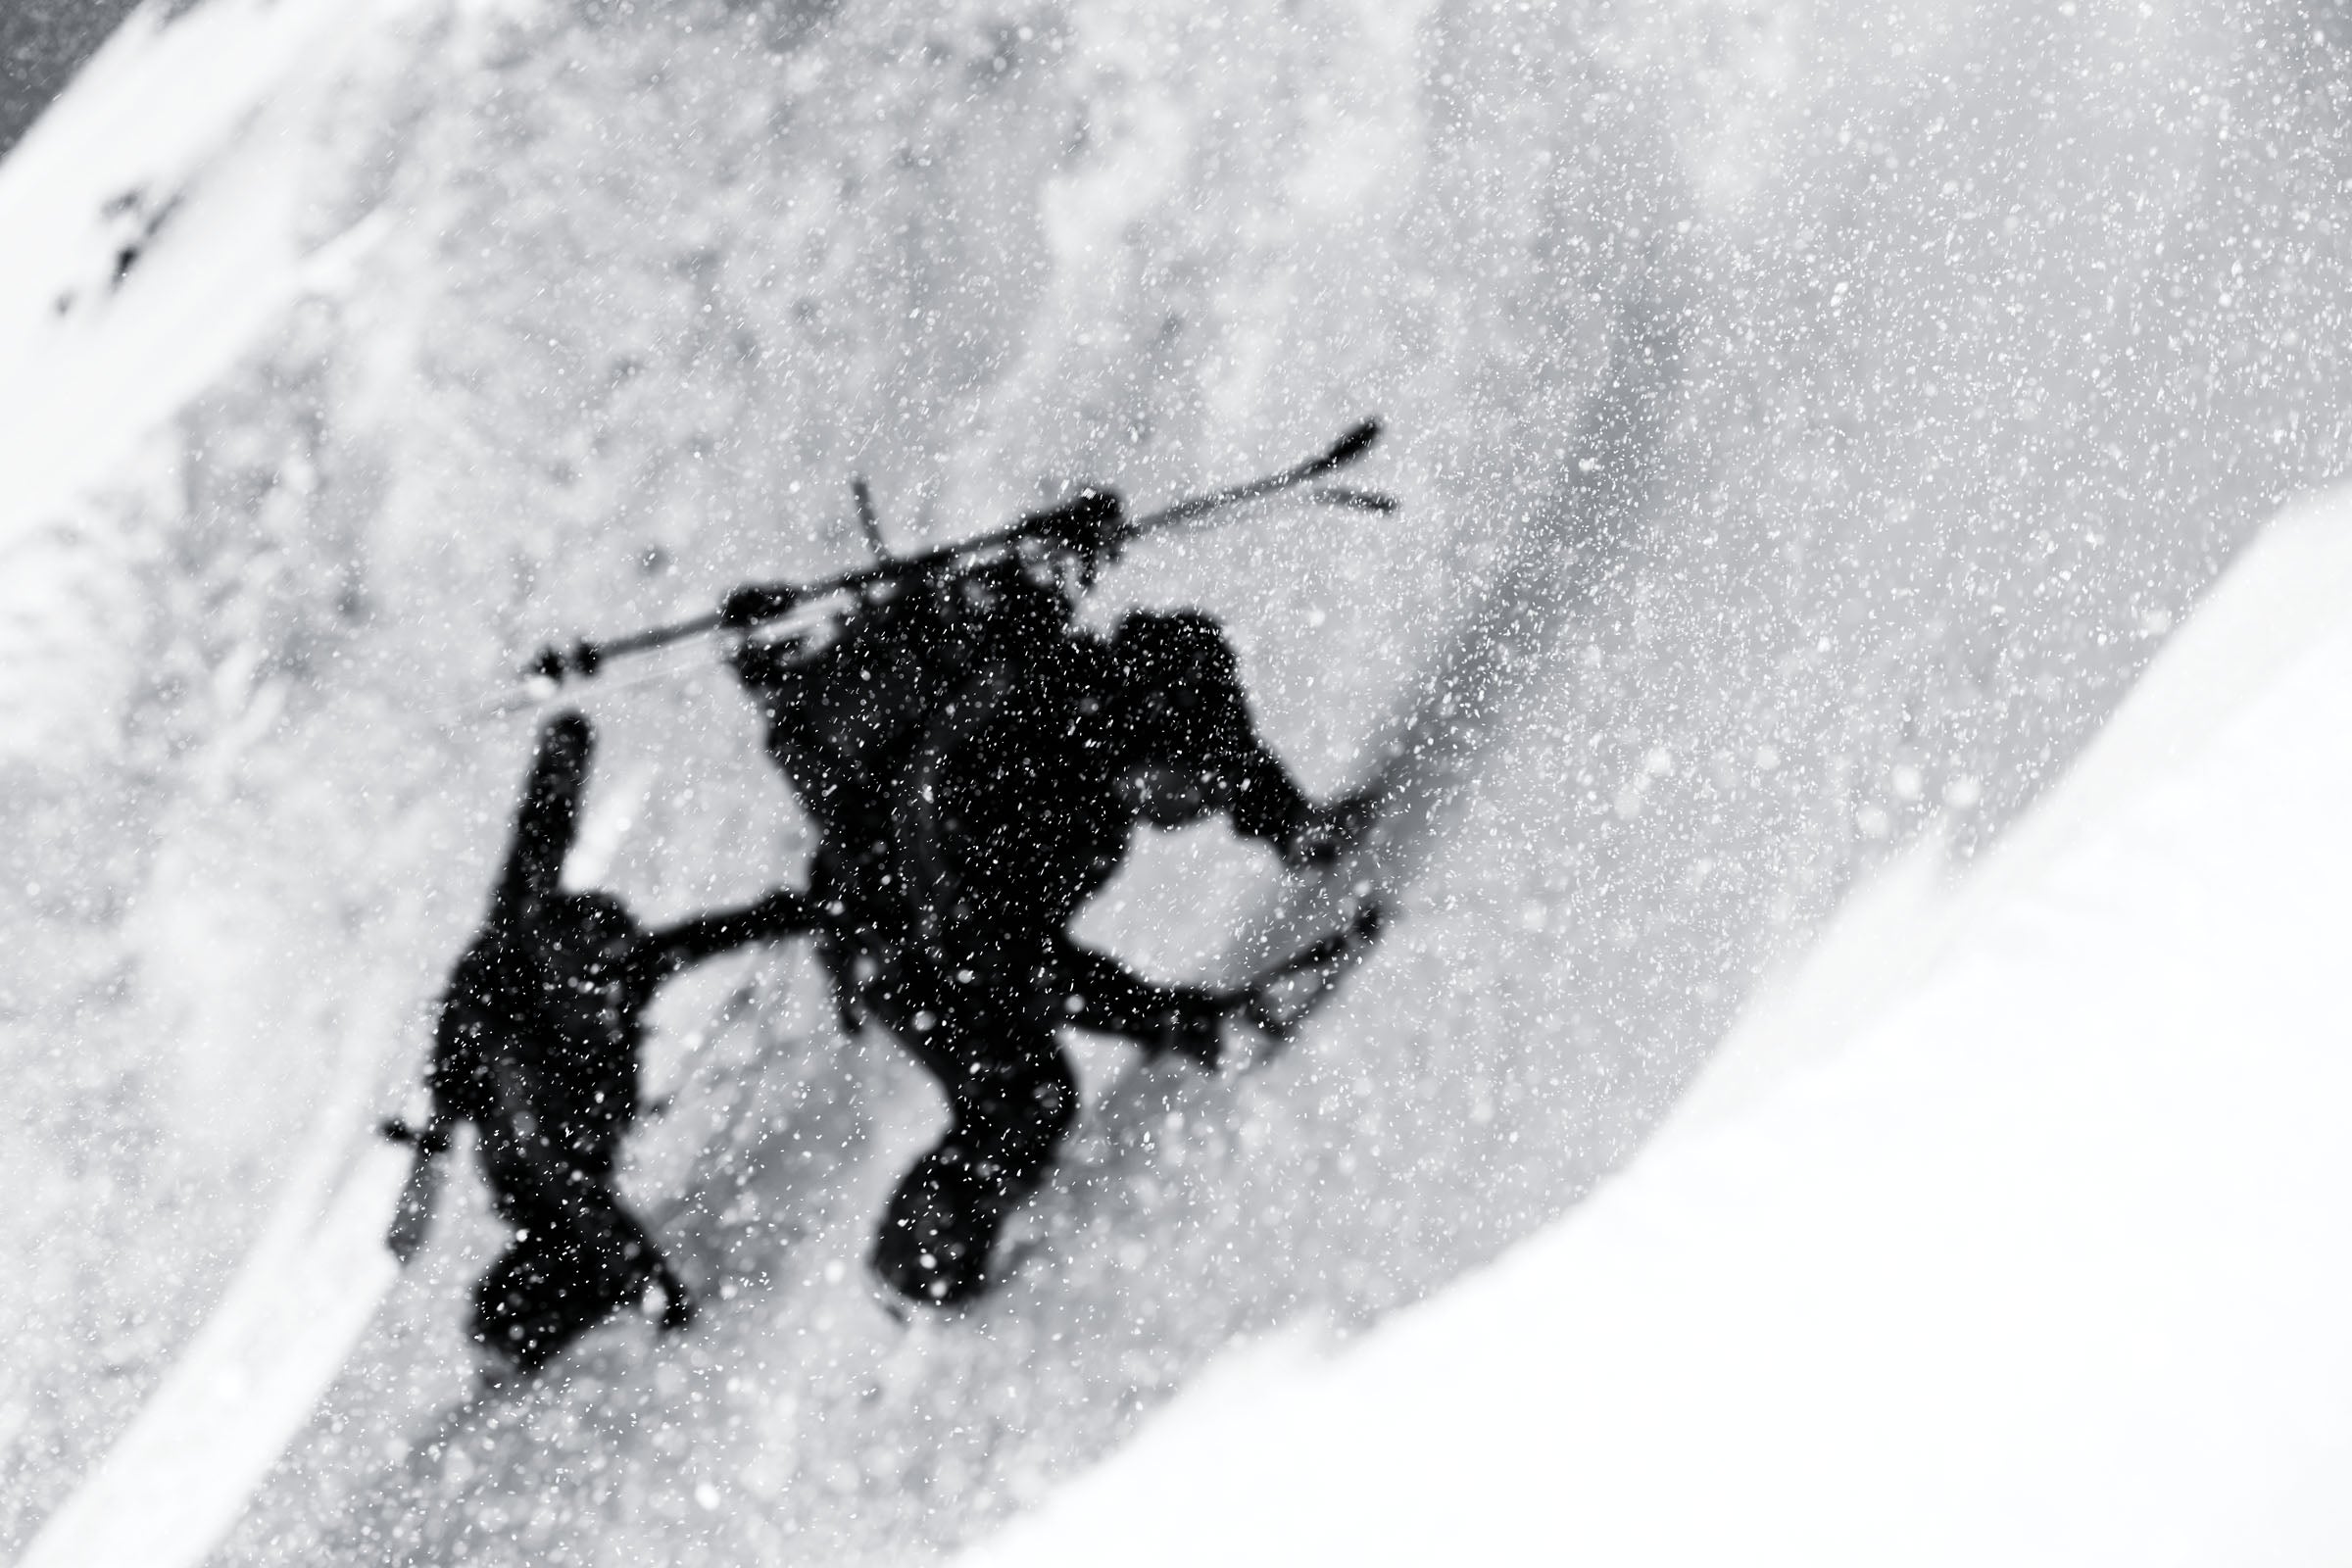 Backcountry Skiing in Smithers, B.C.